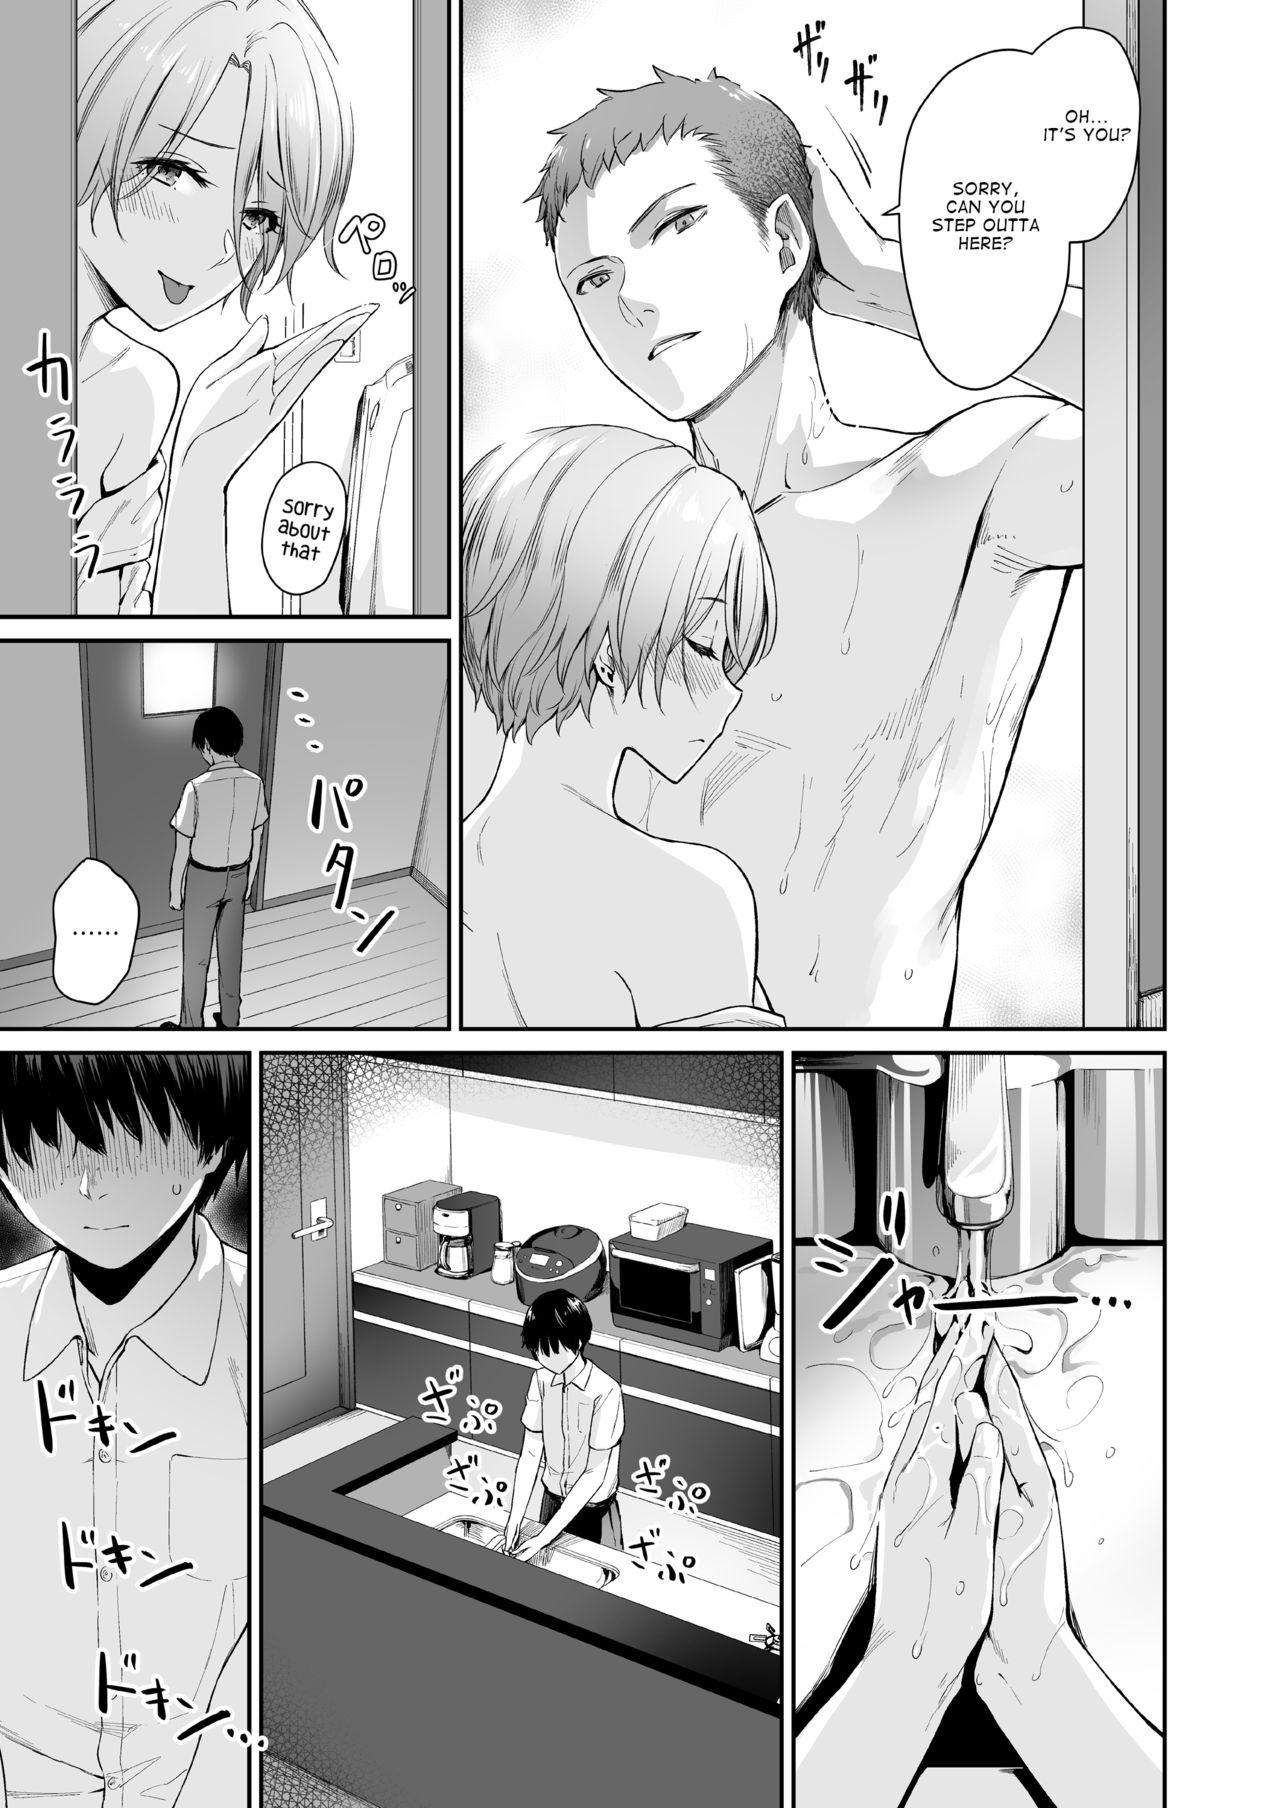 Euro Porn Zoku Boku dake ga Sex Dekinai Ie | I‘m the Only One That Can’t Get Laid in This House Continuation - Original Anime - Page 12